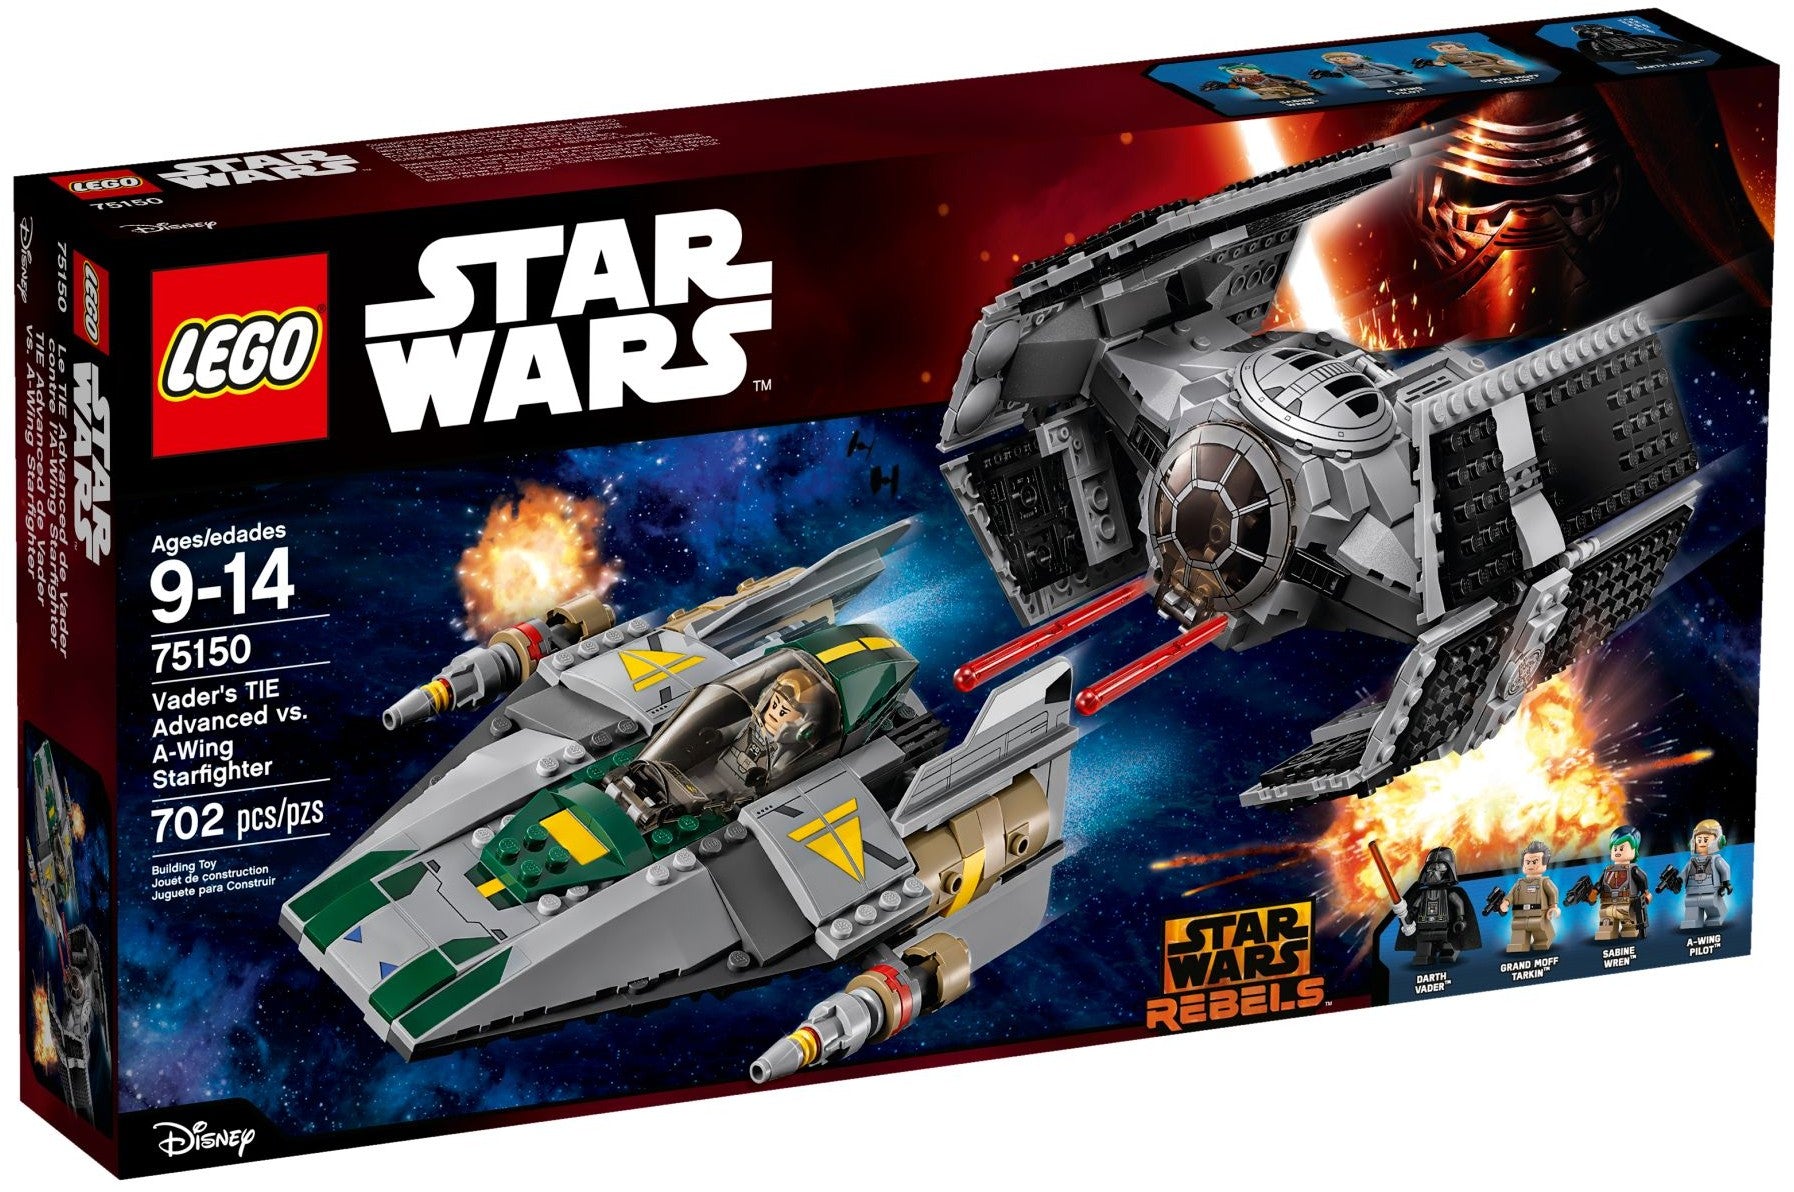 Lego Star Wars 75150 - Vader's TIE Advanced vs. A-wing